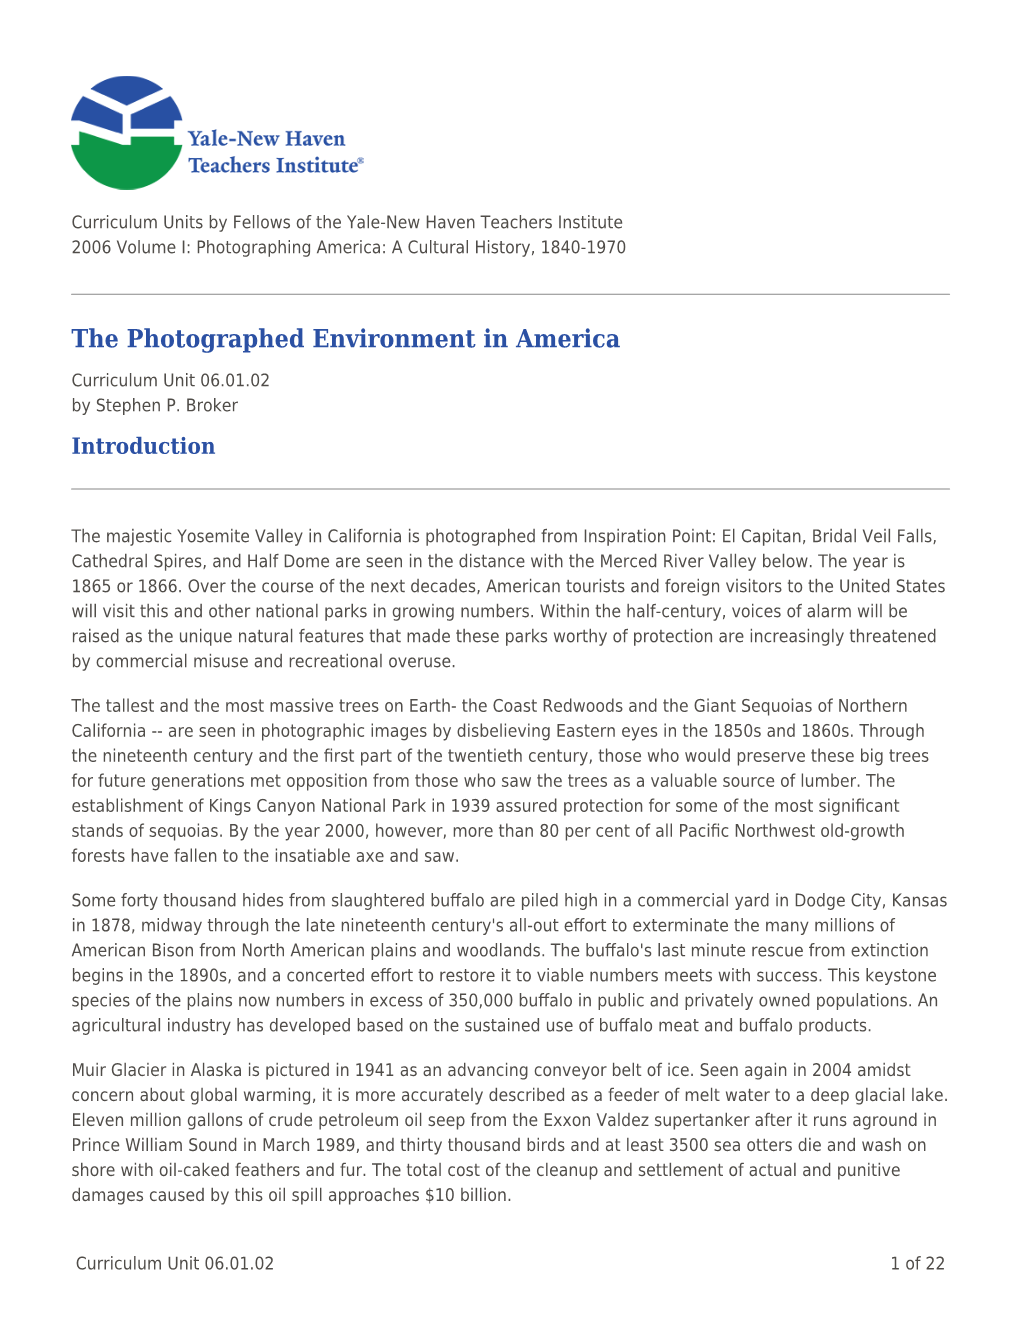 The Photographed Environment in America